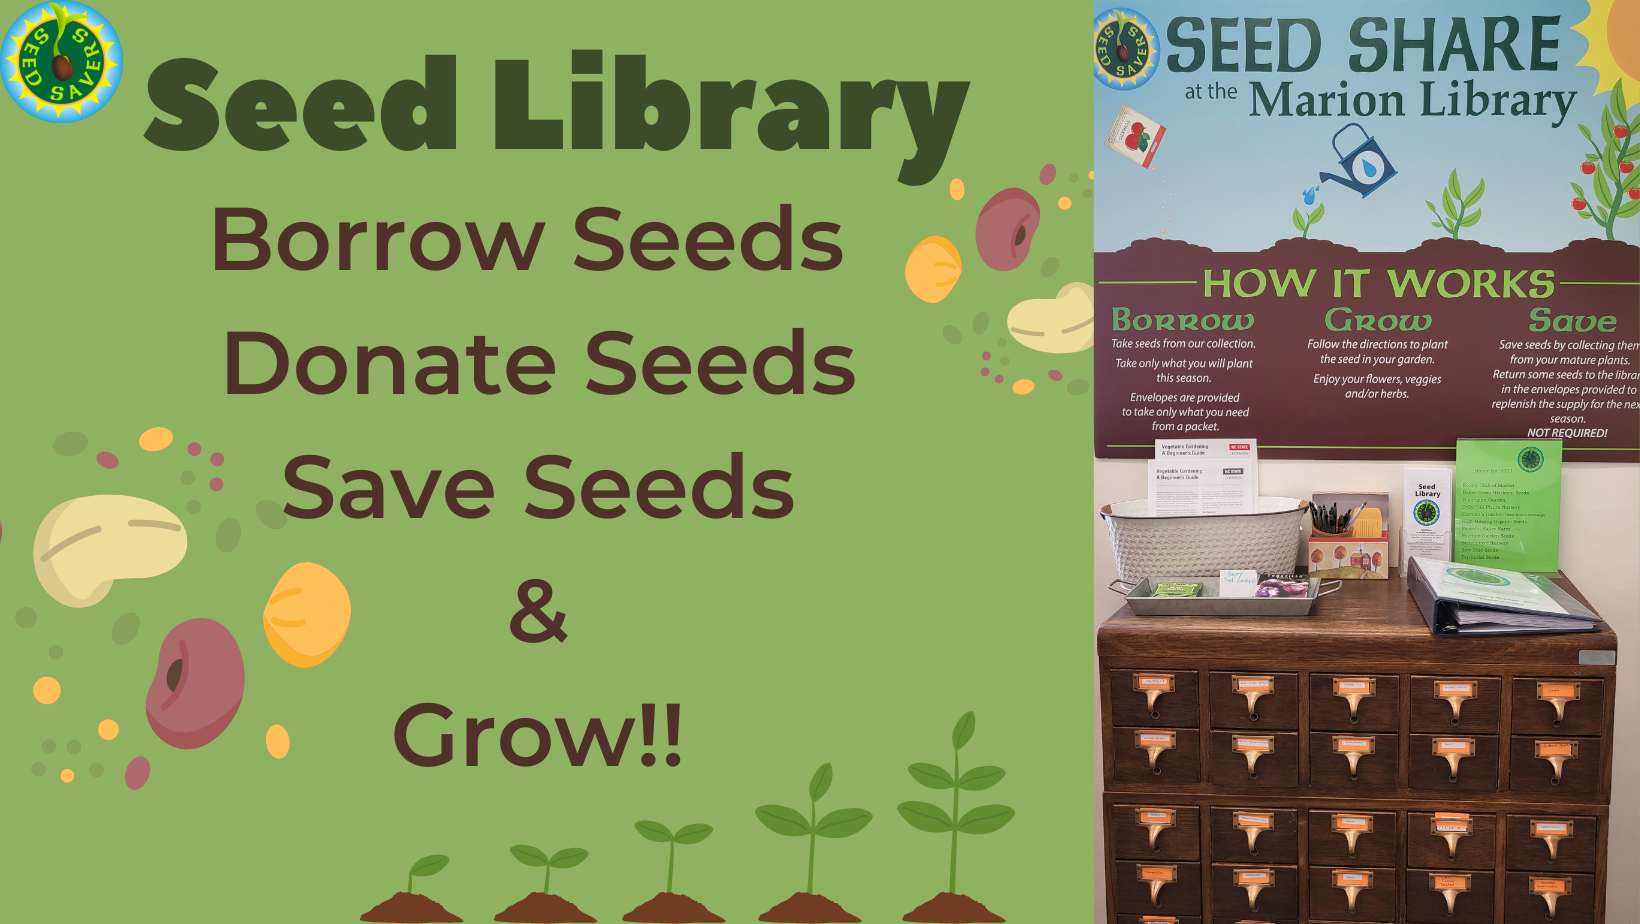 Green background with the Seed Savers logo in the top left corner. Text of "Seed Library Borrow Seeds Donate Seeds Save Seeds & Grow. Various images of seeds and plants around the text. Photo of the seed library catalogue cabinet with the Marion Library Seed Share sign above it.